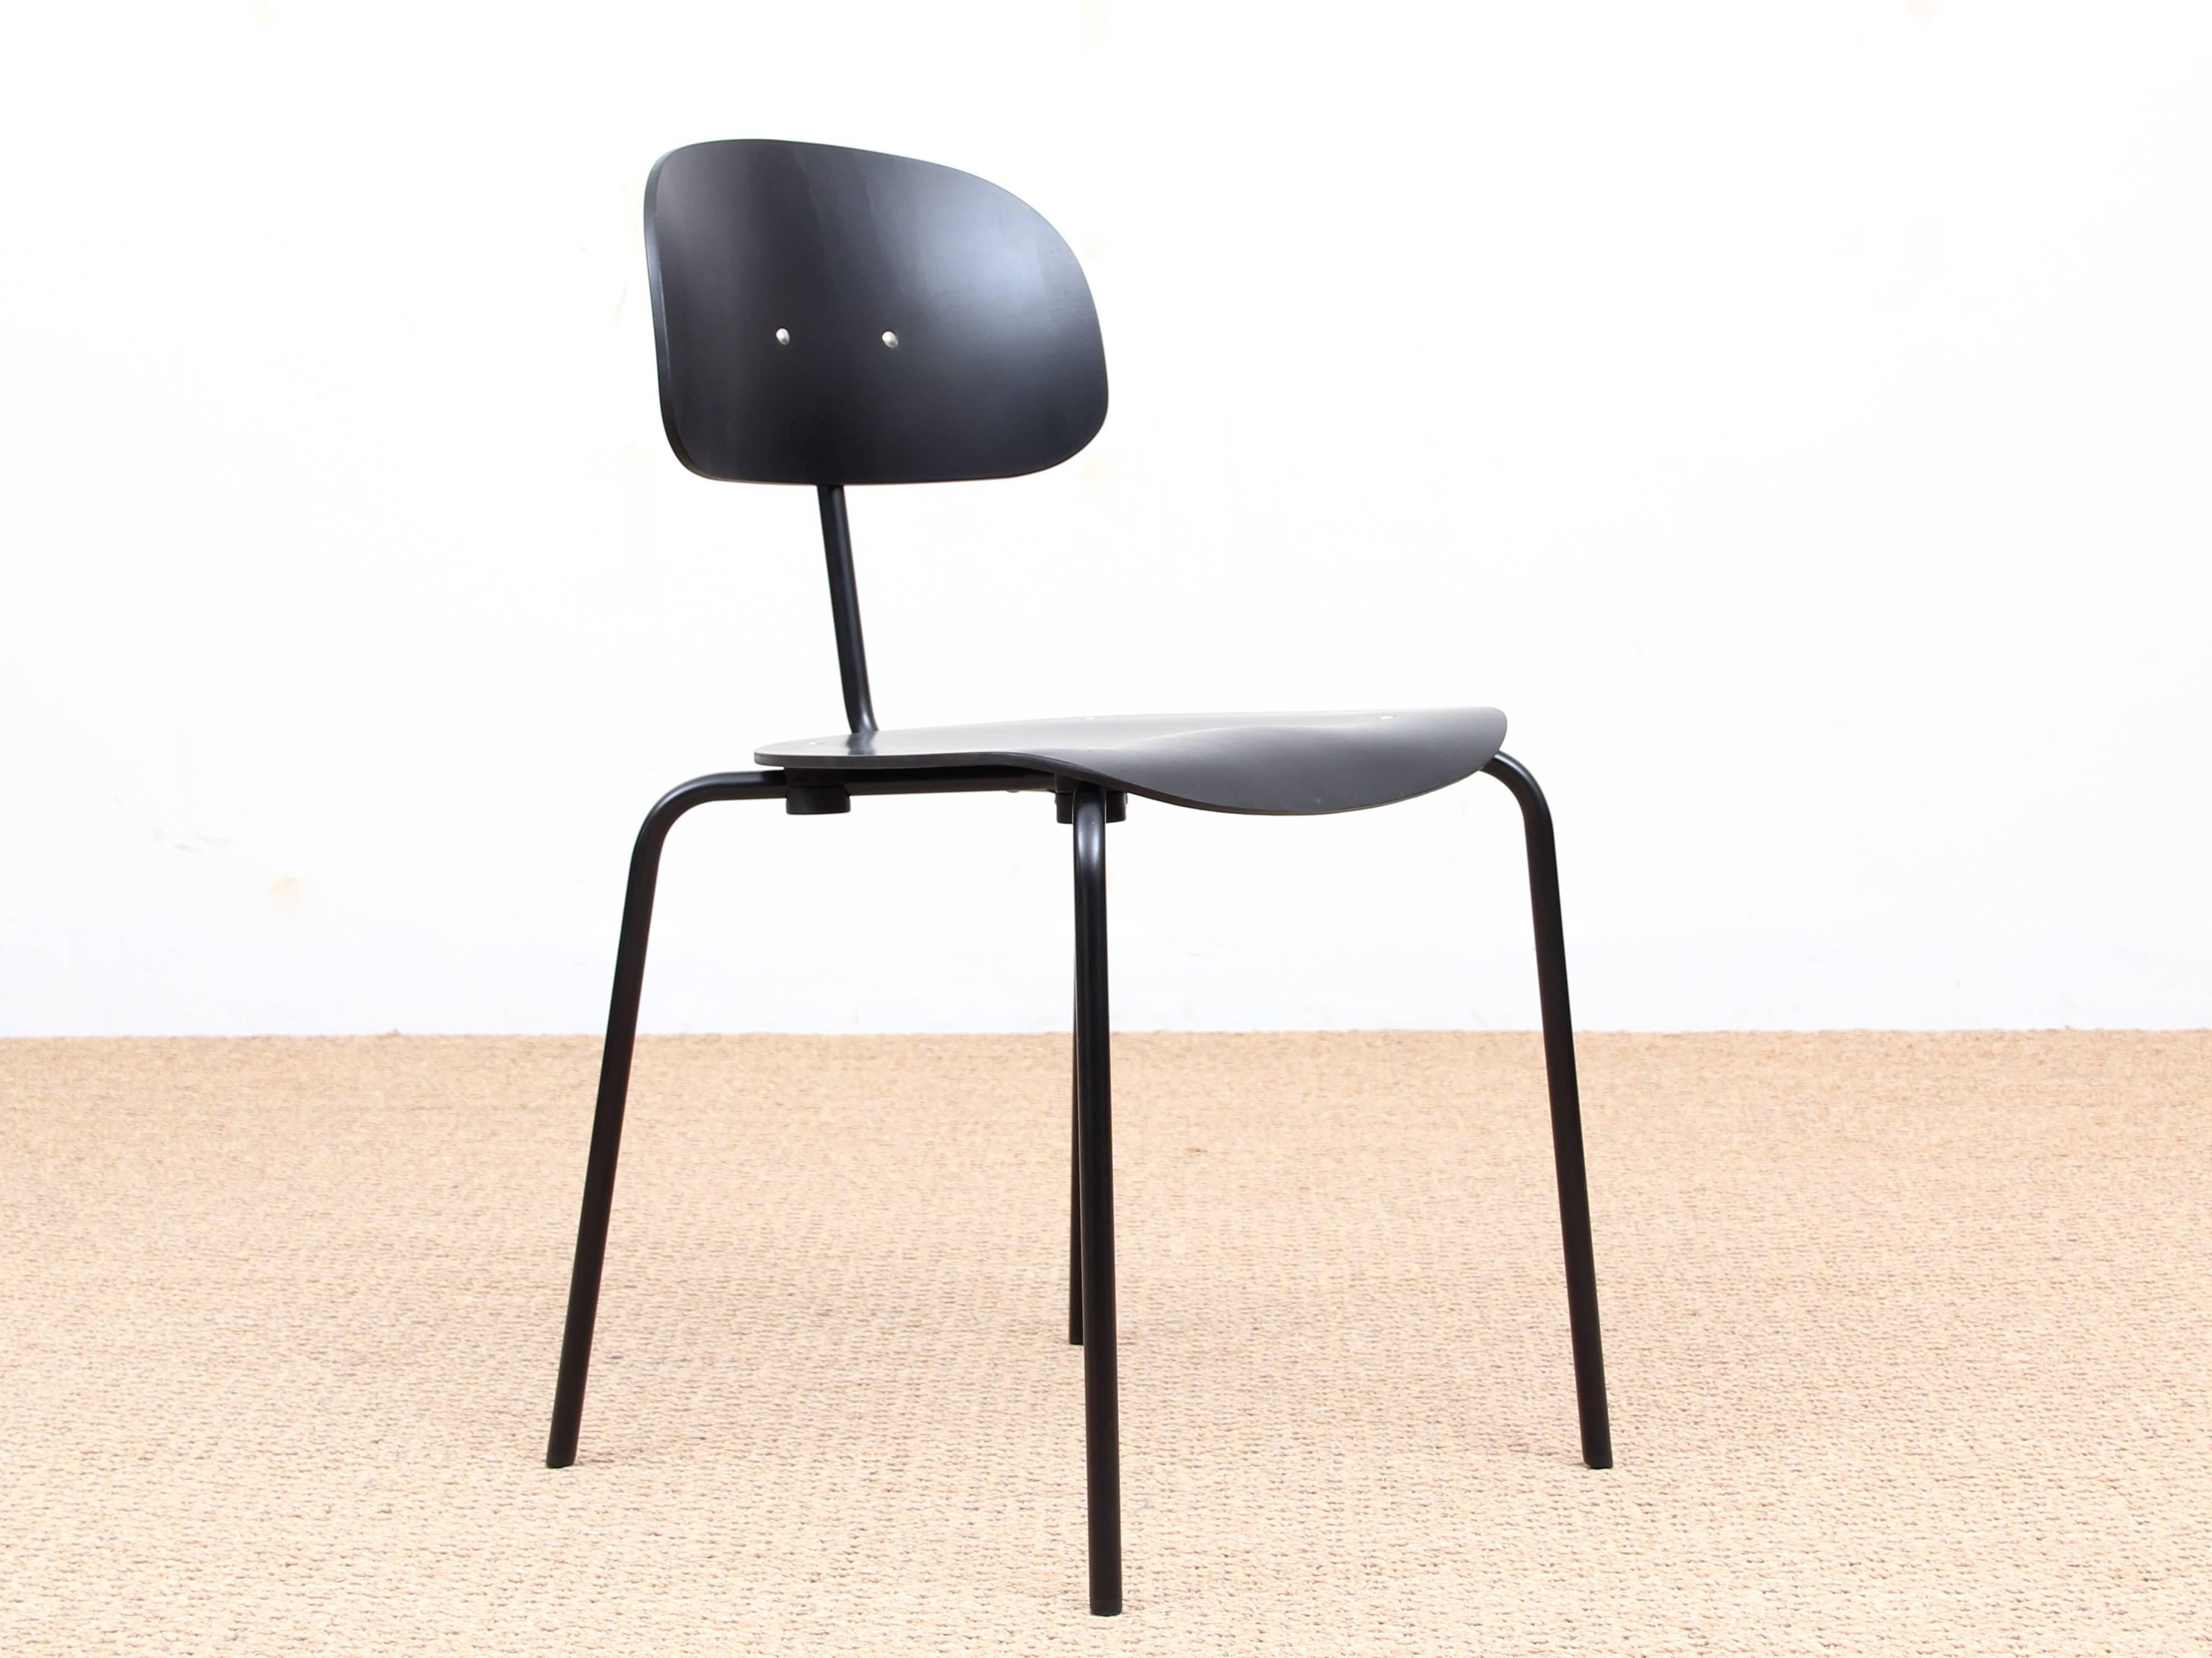 Mid-Century Modern chair model S 118. New release. Frame in black or chrome-plated steel tube, seat and back in natural or stained plywood beech.

Created in 1946 by the German designer Rudolph Kleinfopf, the S 118 is launched in Europe at the